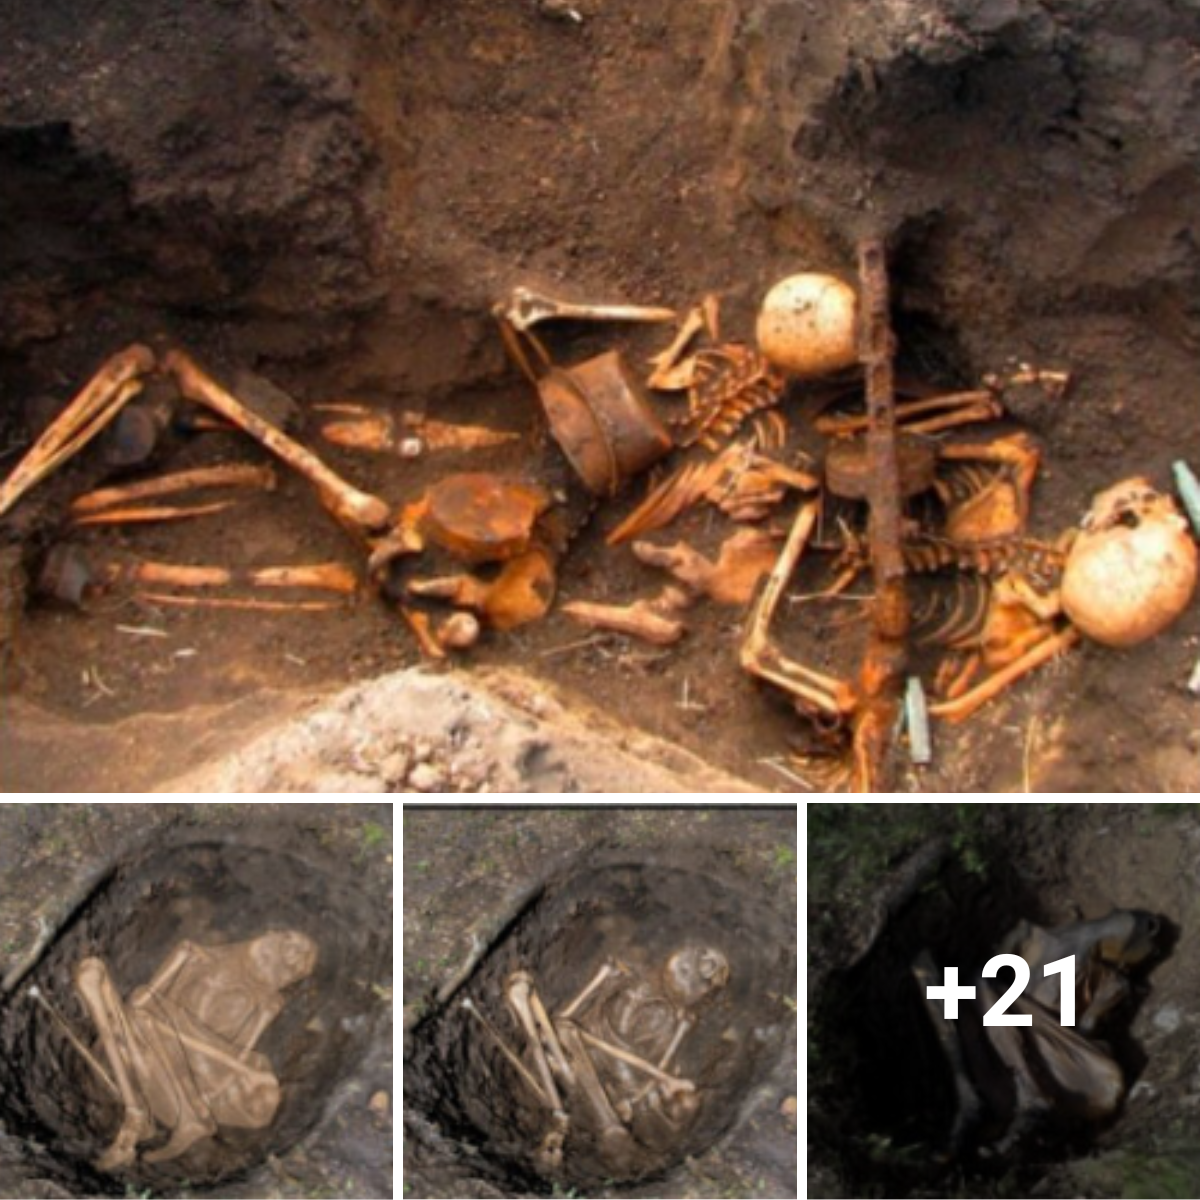 The world’s oldest mummies are Portugal’s 8,000-year-old human skeletons, which provide a unique and profound window into the early stages of civilization.